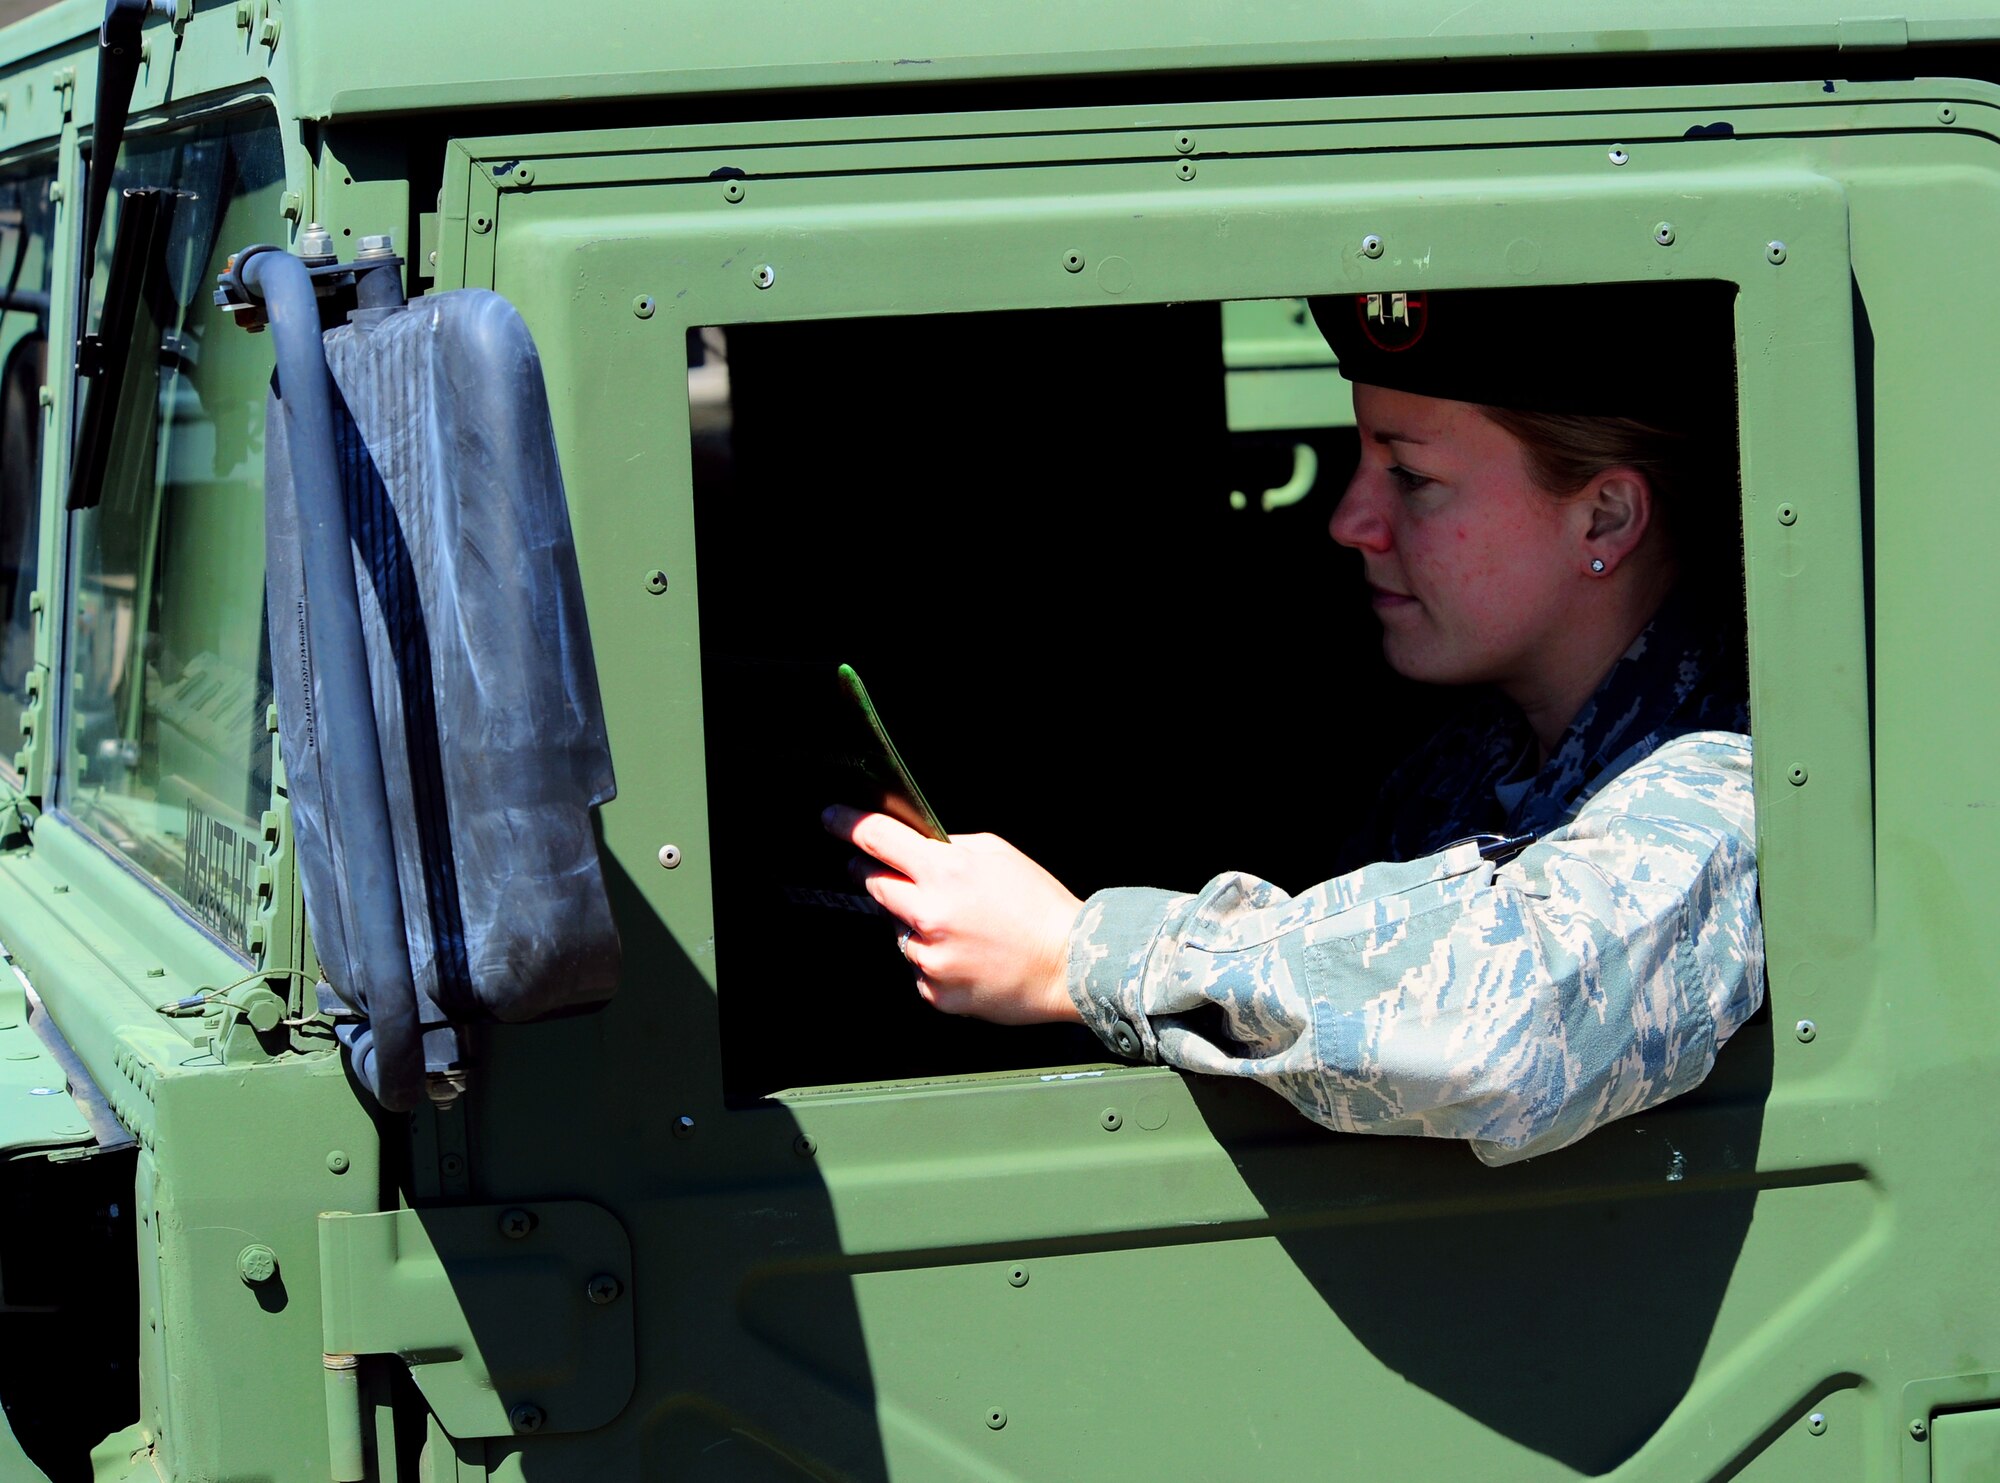 Capt. Sarah Eccles sits in a HUMVEE and checks a map April 5, 2011.  Captain Eccles, an F-16 Fighting Falcon pilot, currently is serving in a career-broadening assignment as an air liaison officer in the 682nd Air Support Operations Squadron at Shaw Air Force Base, S.C.  (U.S. Air Force photo/Airman 1st Class Daniel Phelps)